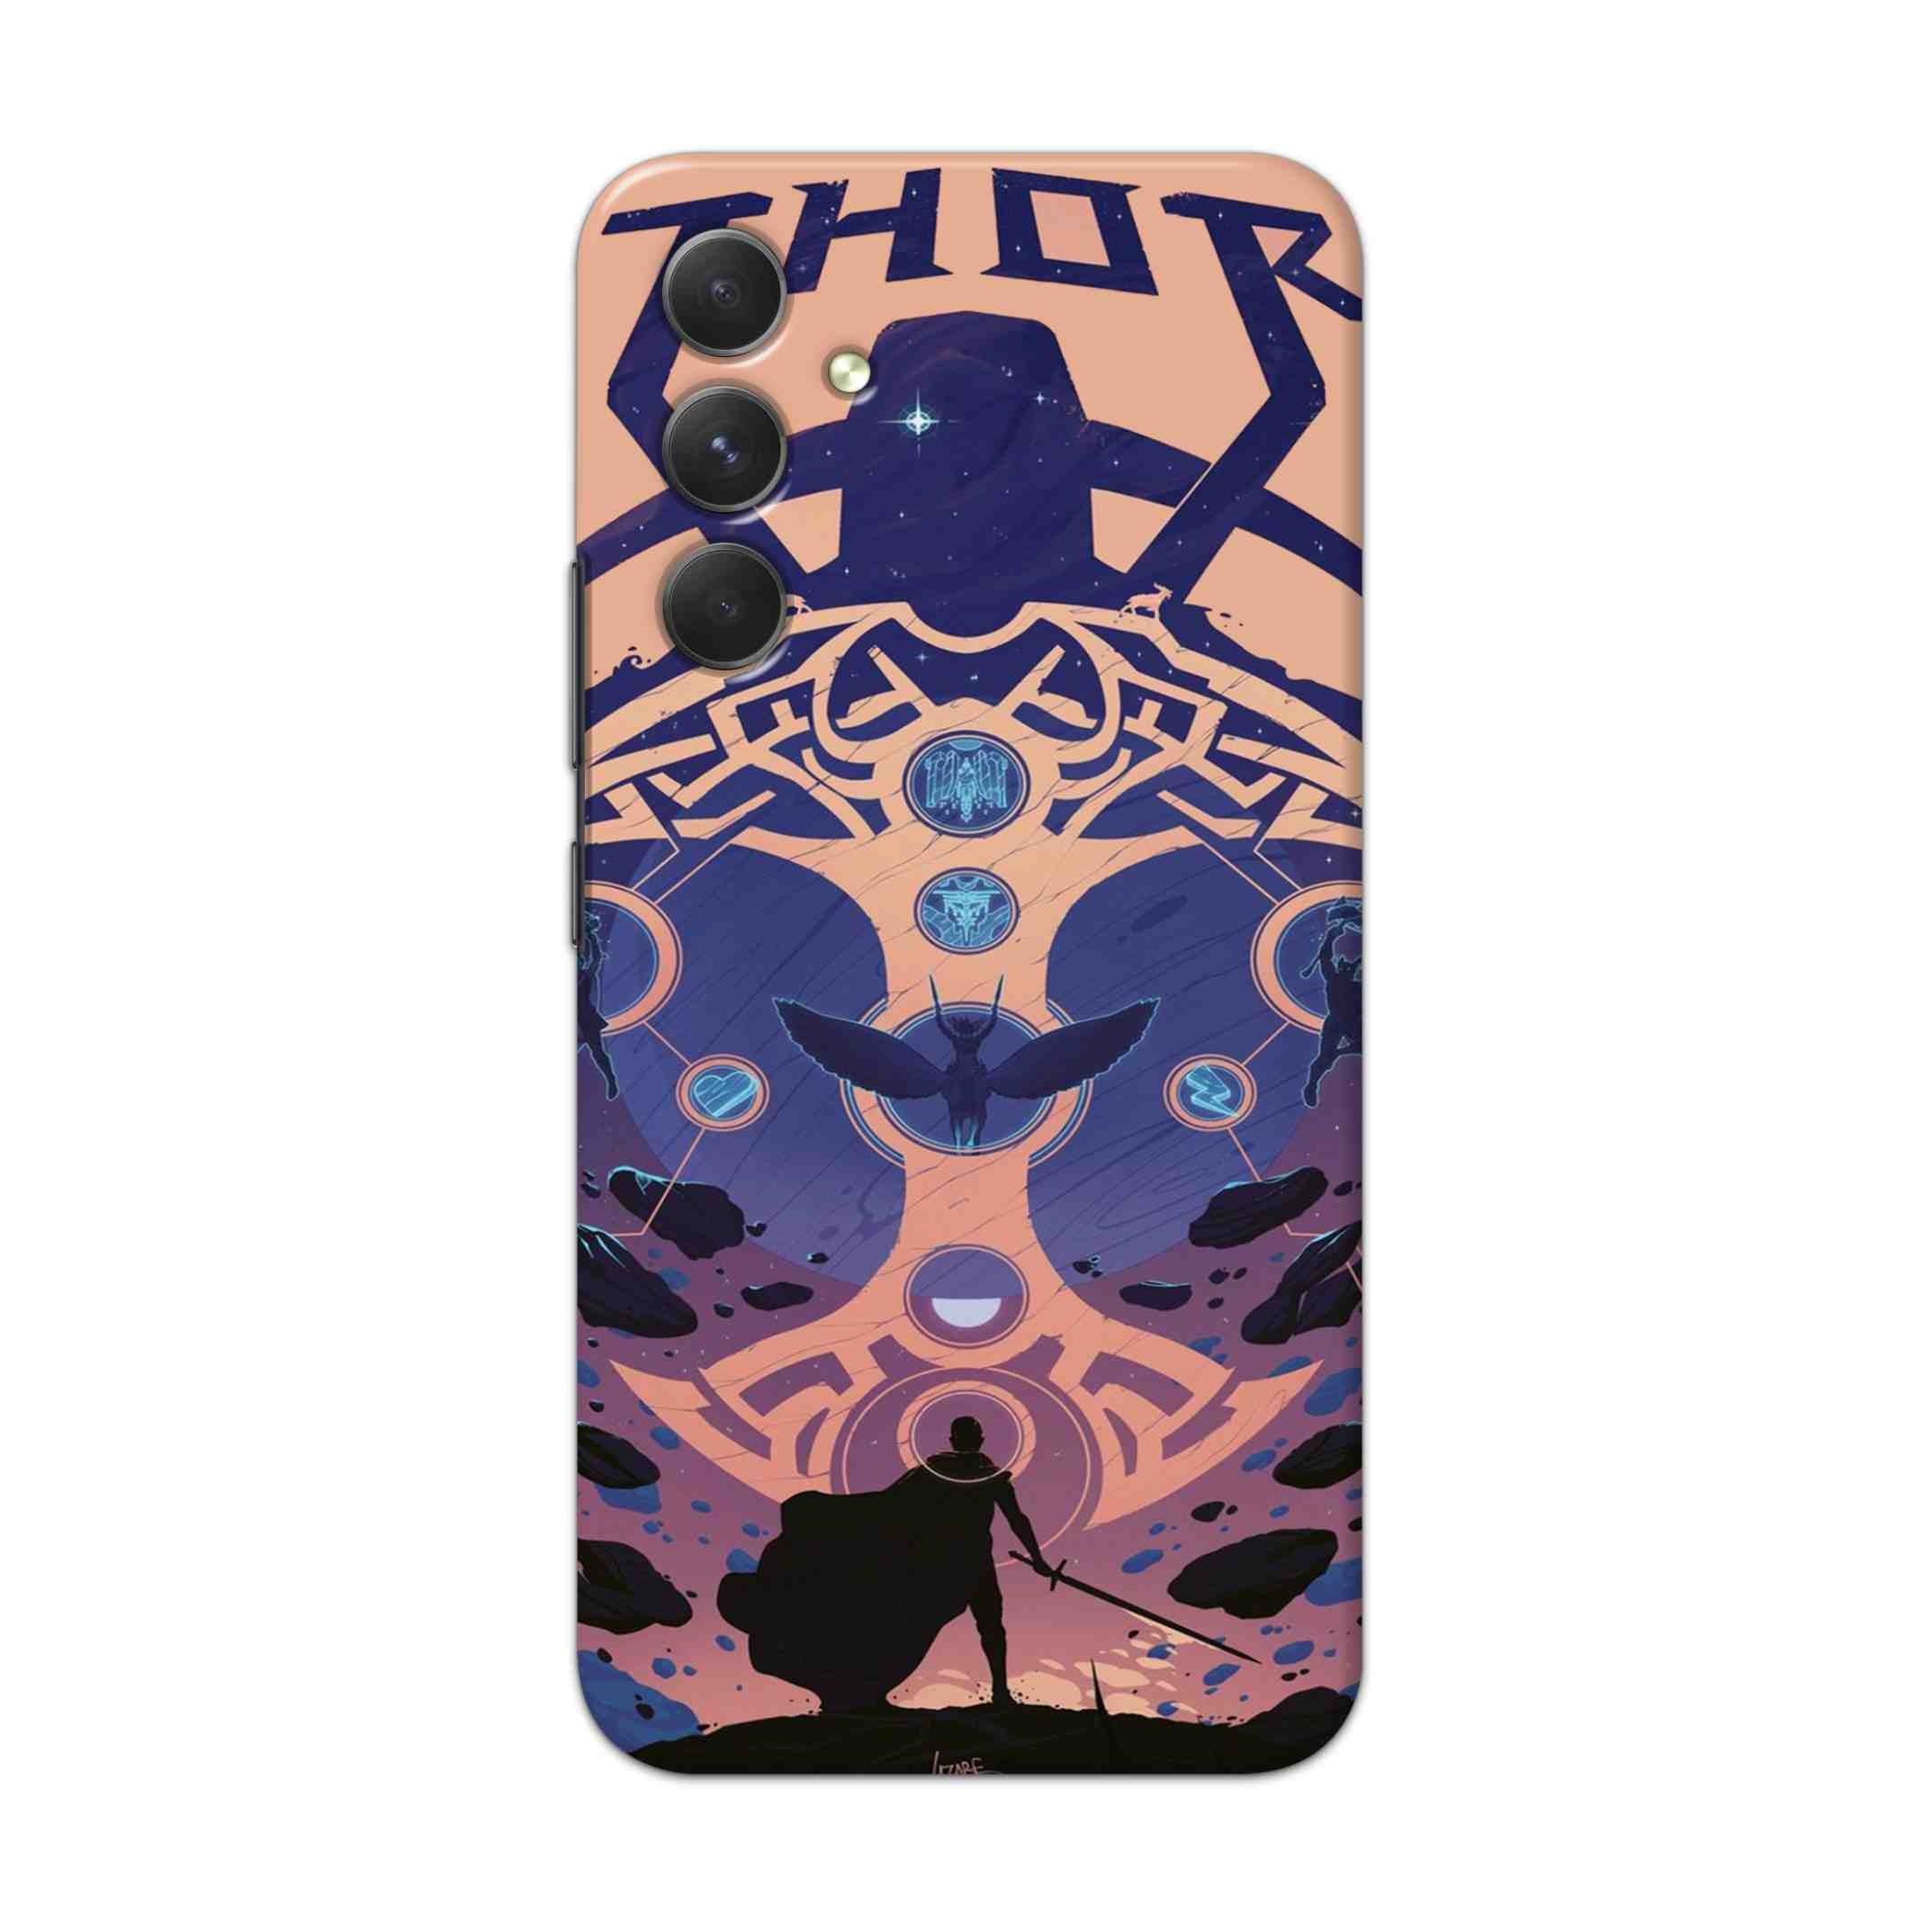 Buy Thor Hard Back Mobile Phone Case Cover For Samsung Galaxy A54 5G Online